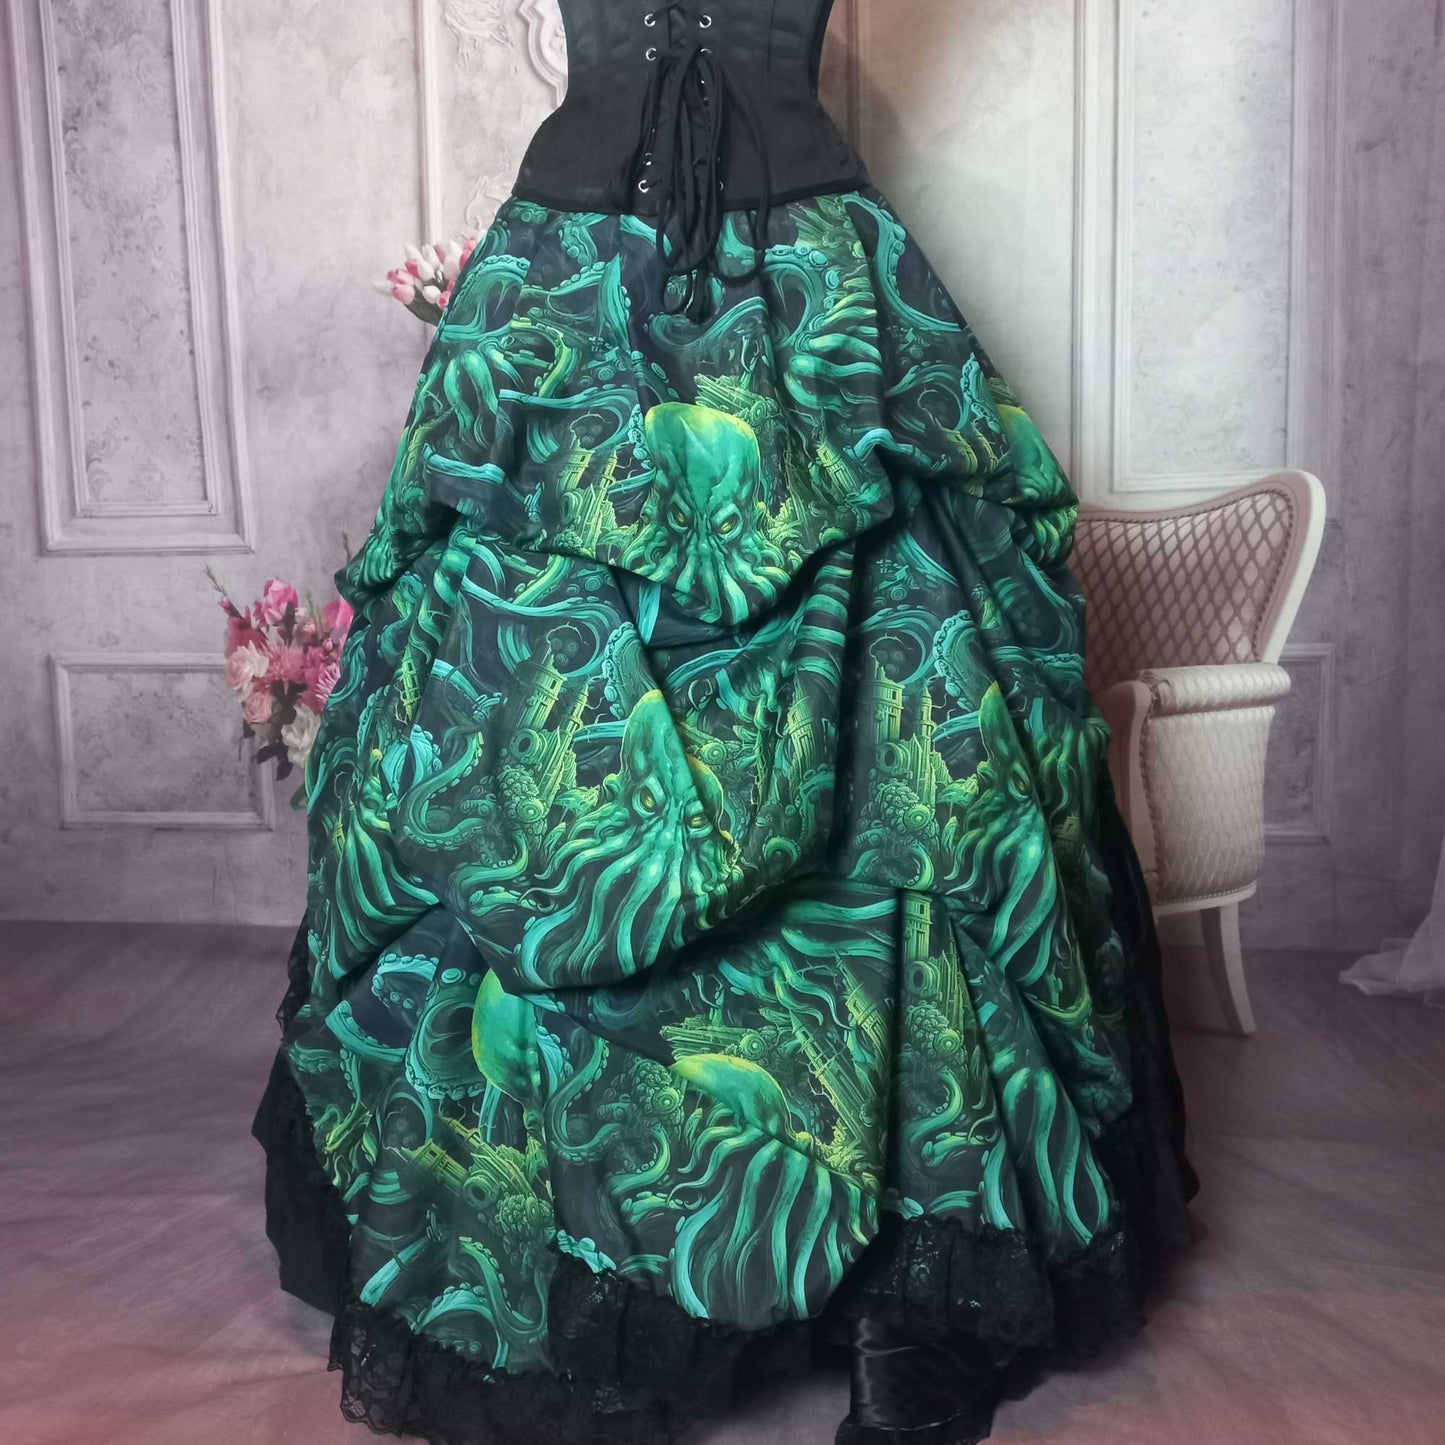 Call of Cthulhu victorian high low bustle skirt, made to measure in Australia worn over a petticoat